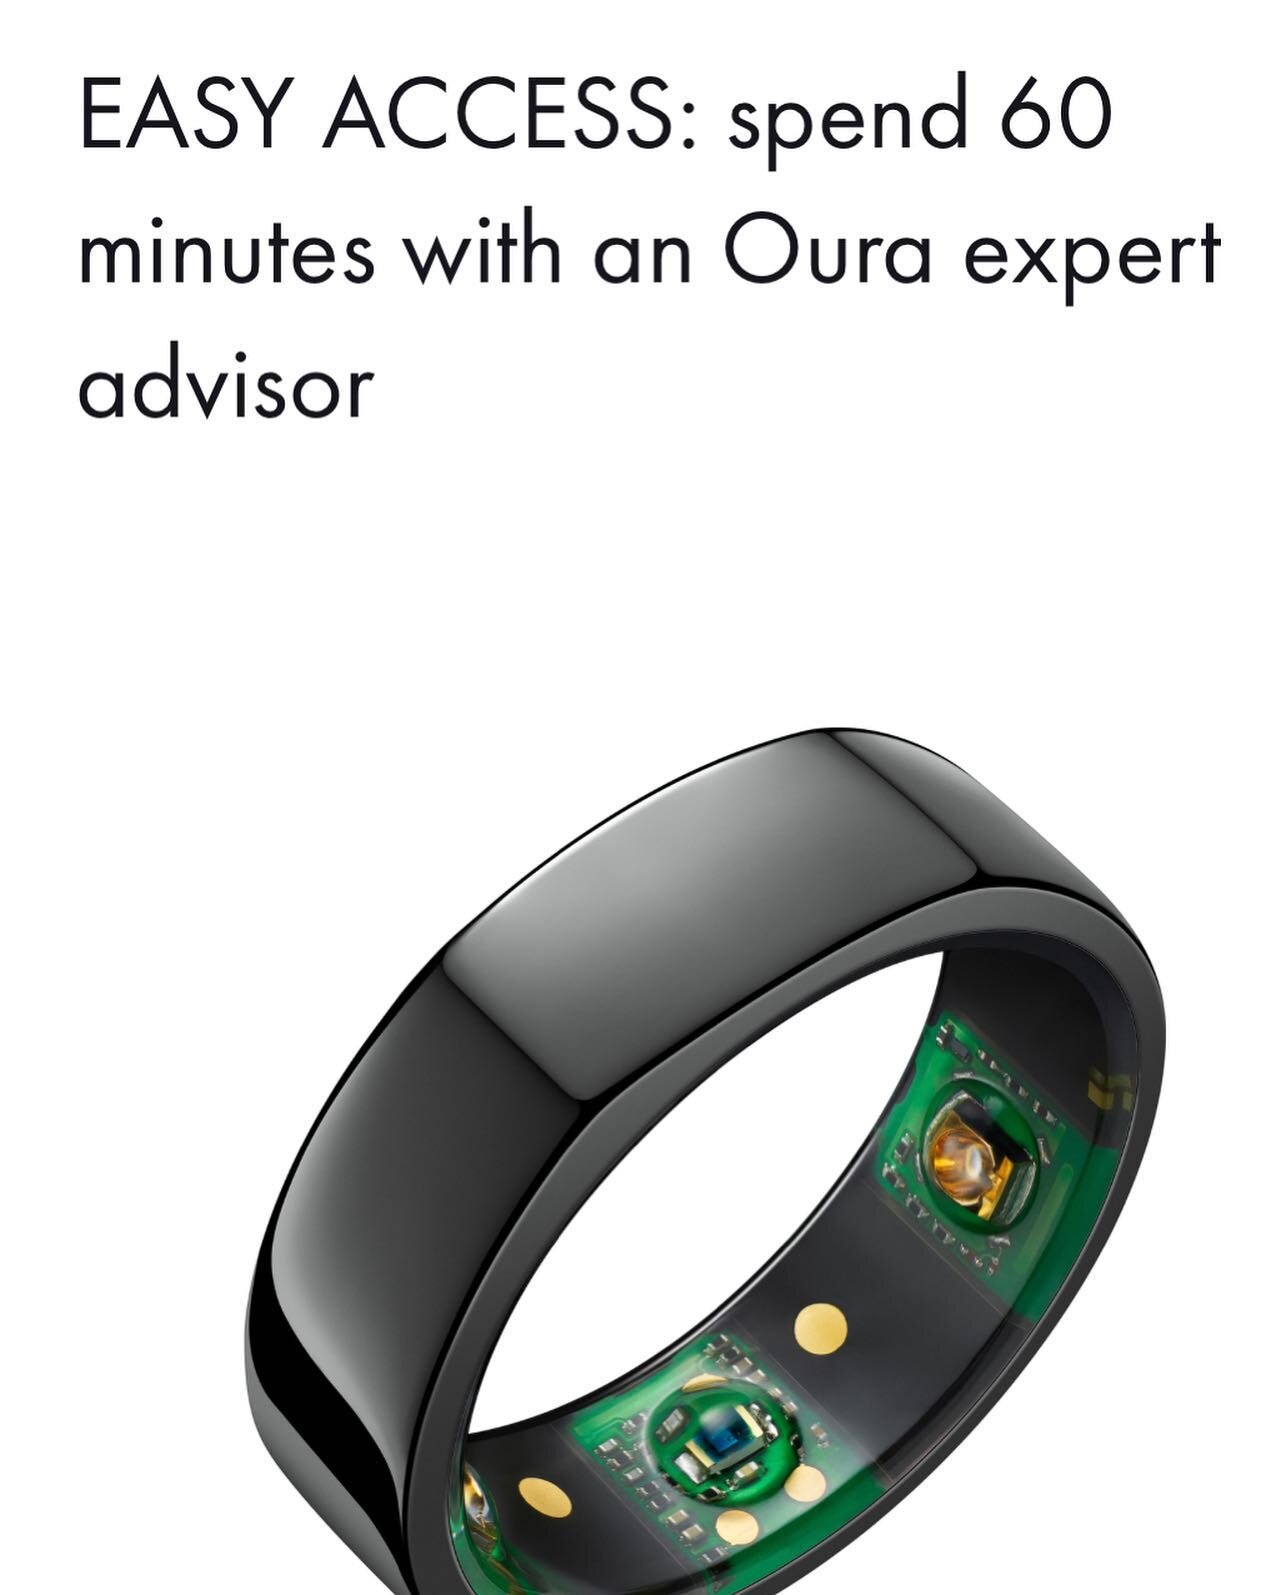 Are you an #OURAring user?! Get the best out of your #OURA for YOU. Make the app to your personal coach. 
🤓🤓🤓

⚡️Would you like to lead your performance, decisions and actions based on body data? 
⚡️Having a tough time utilizing your OURA app data